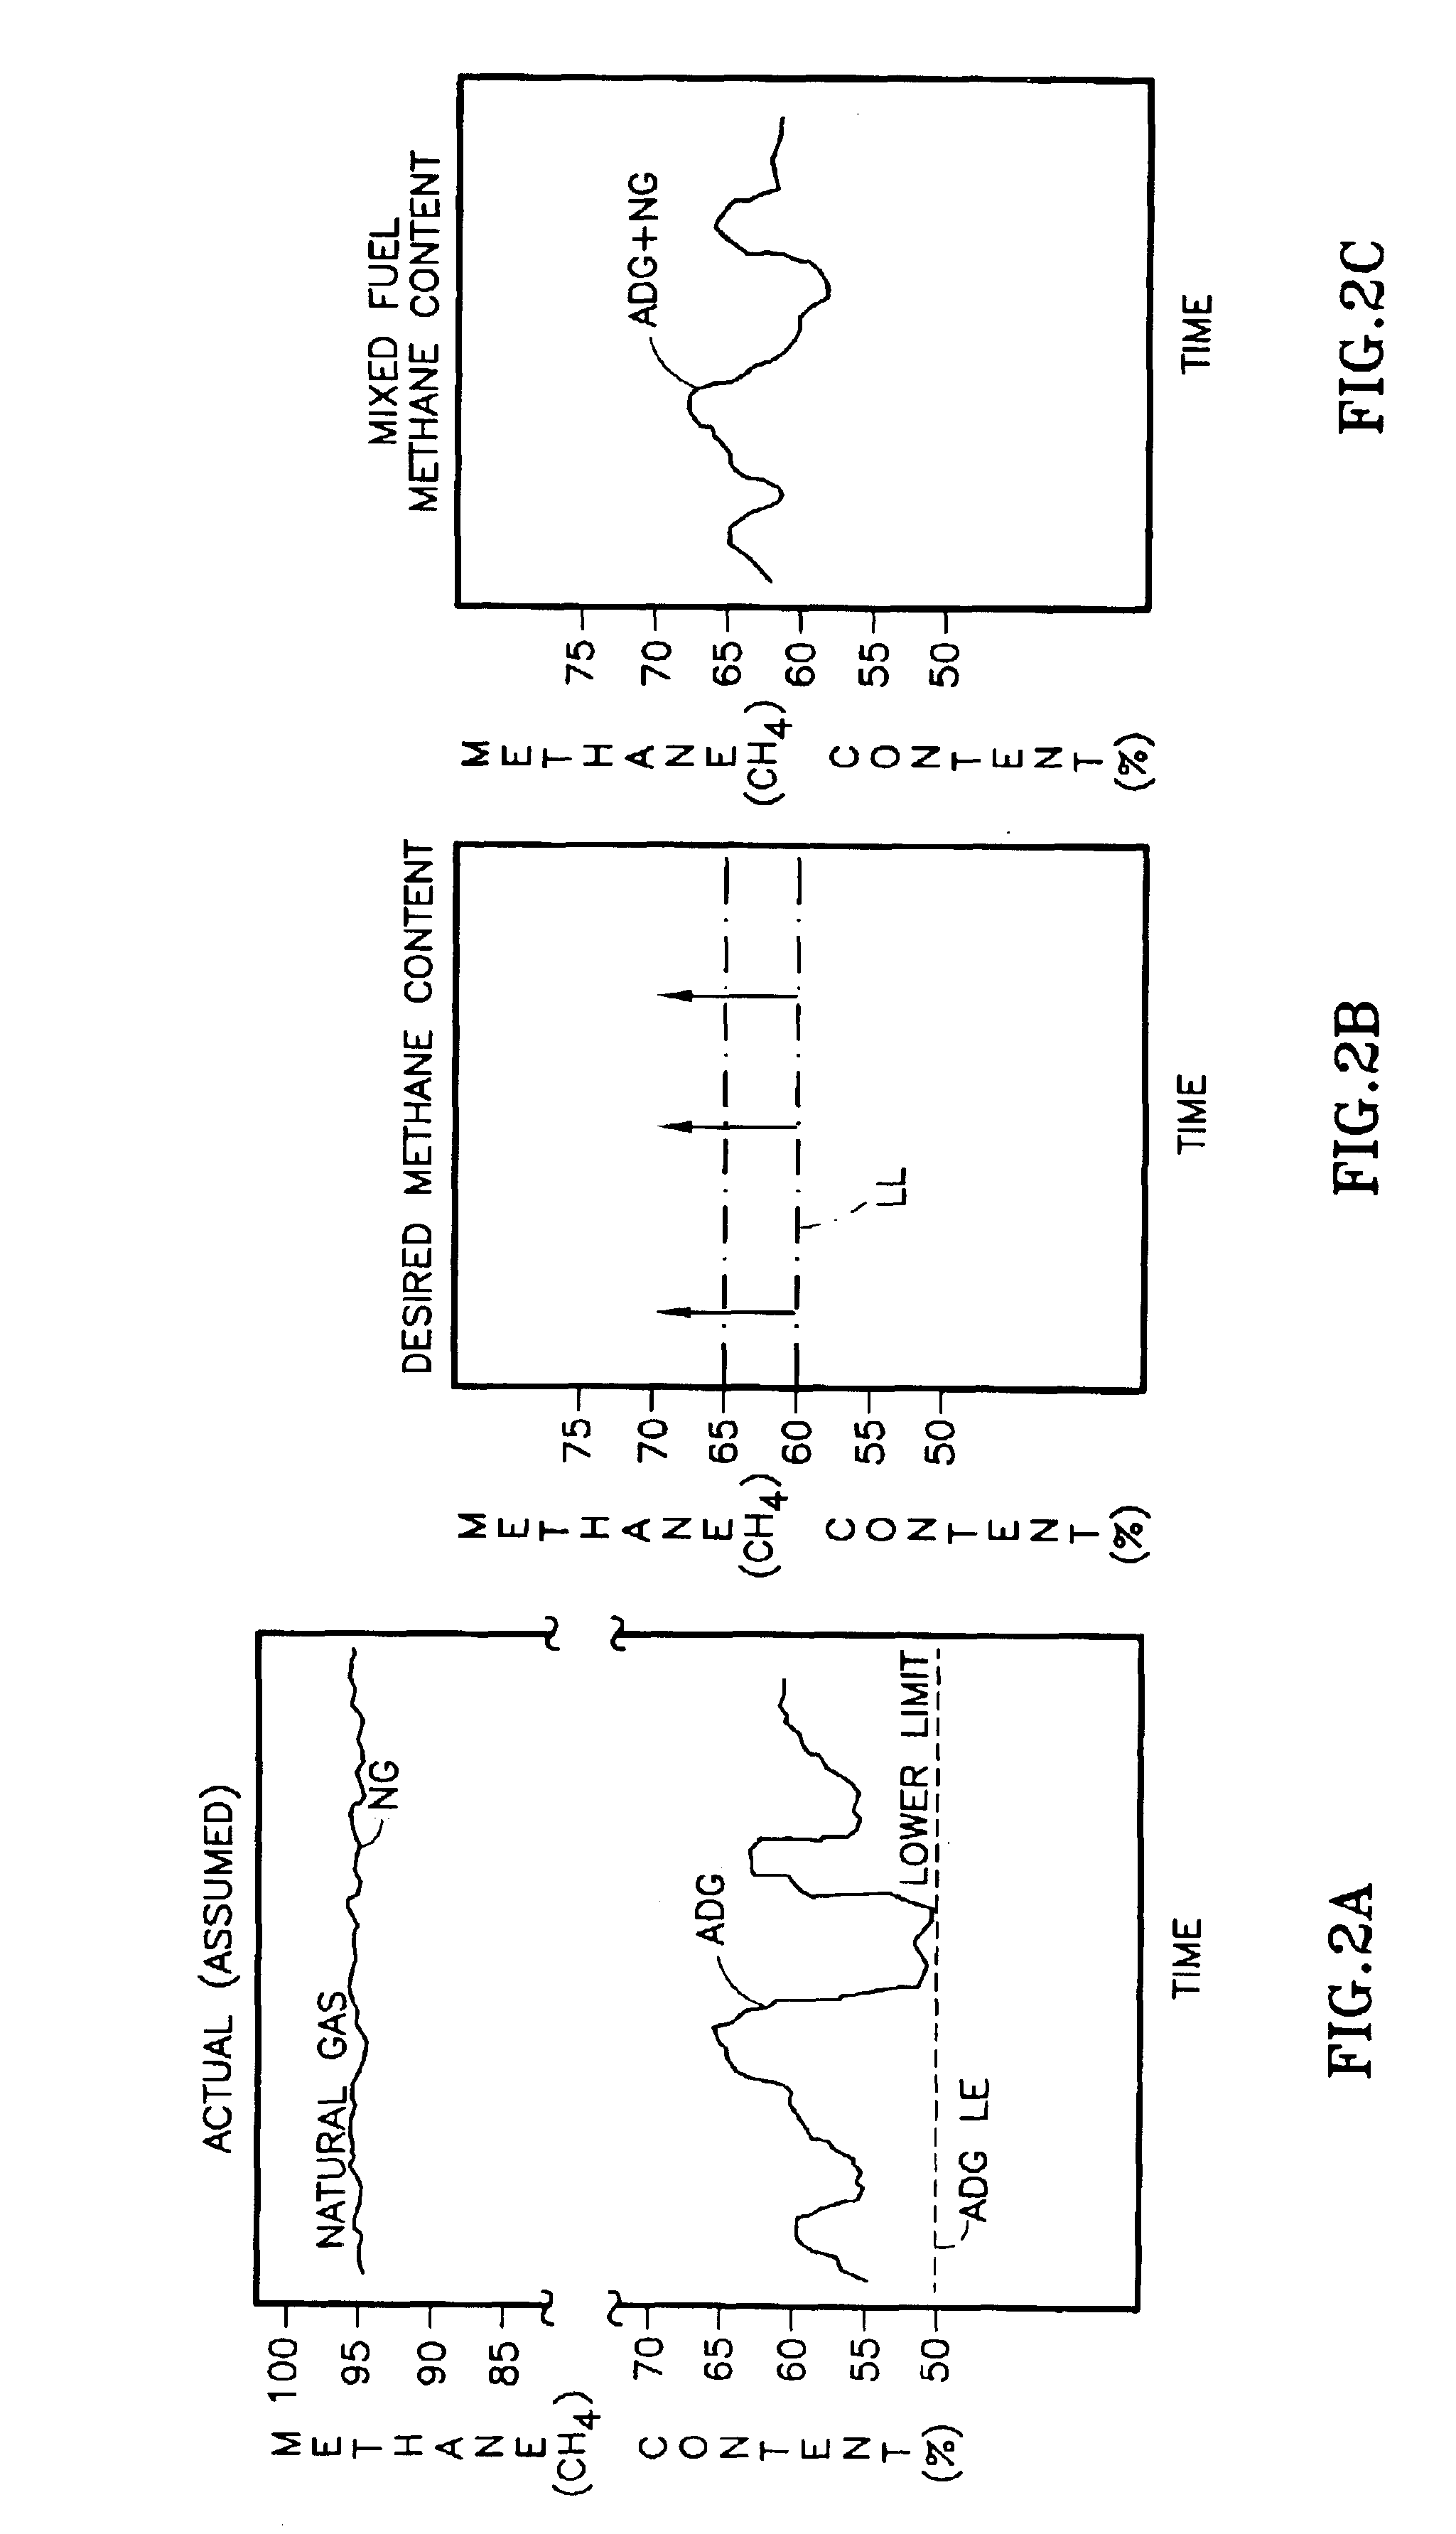 Fuel mixing control for fuel cell power plants operating on multiple fuels